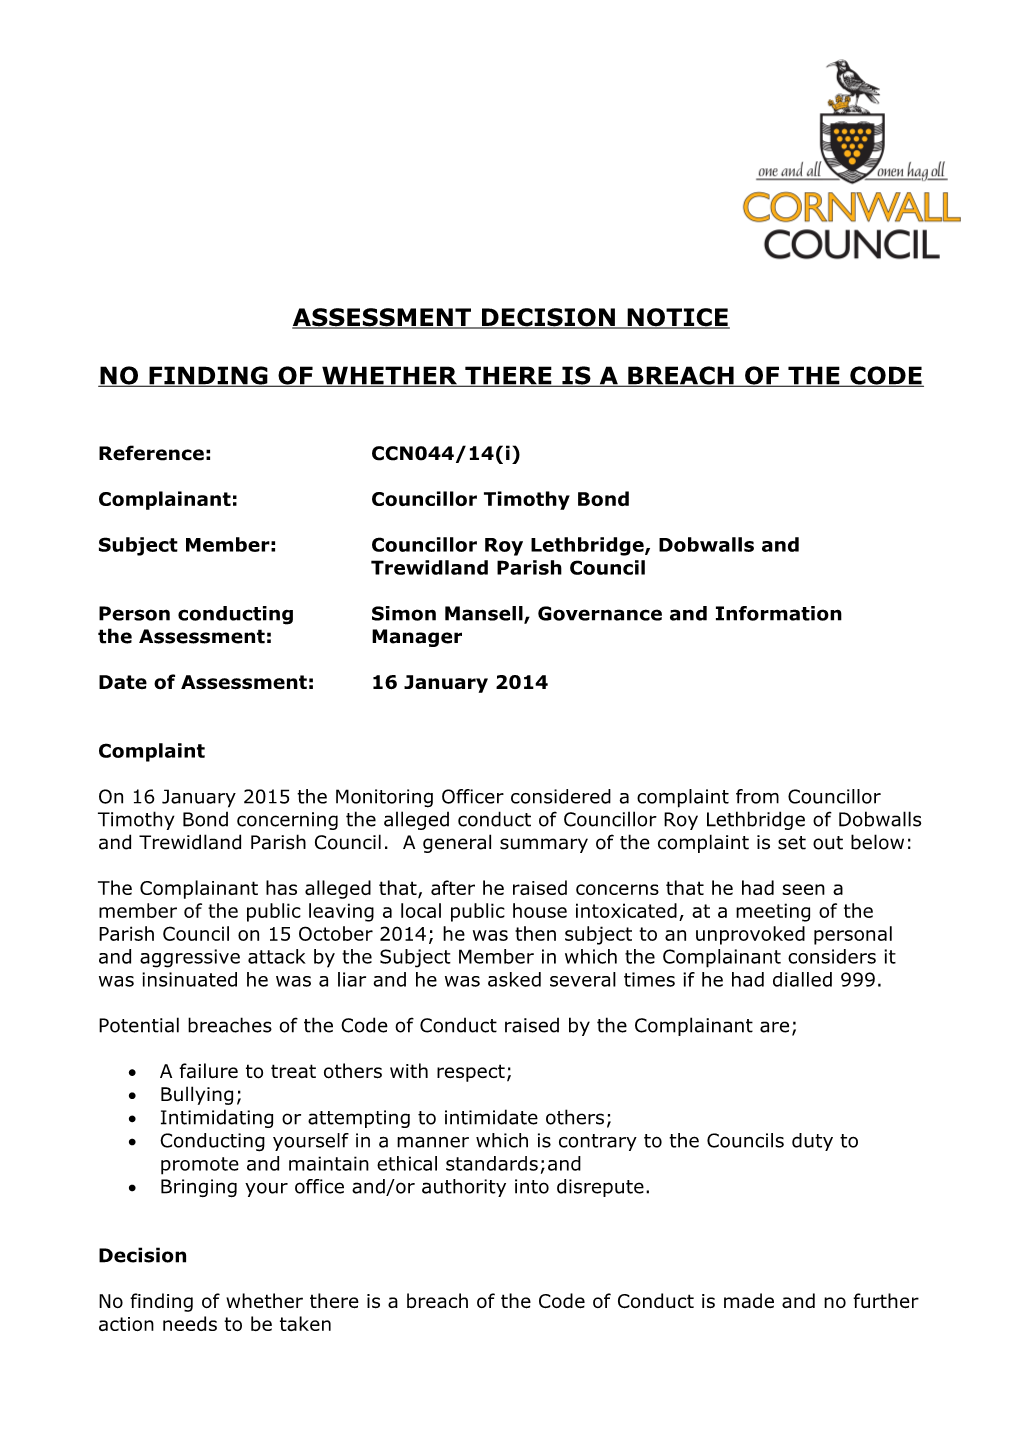 No Finding of Whether There Is a Breach of the Code